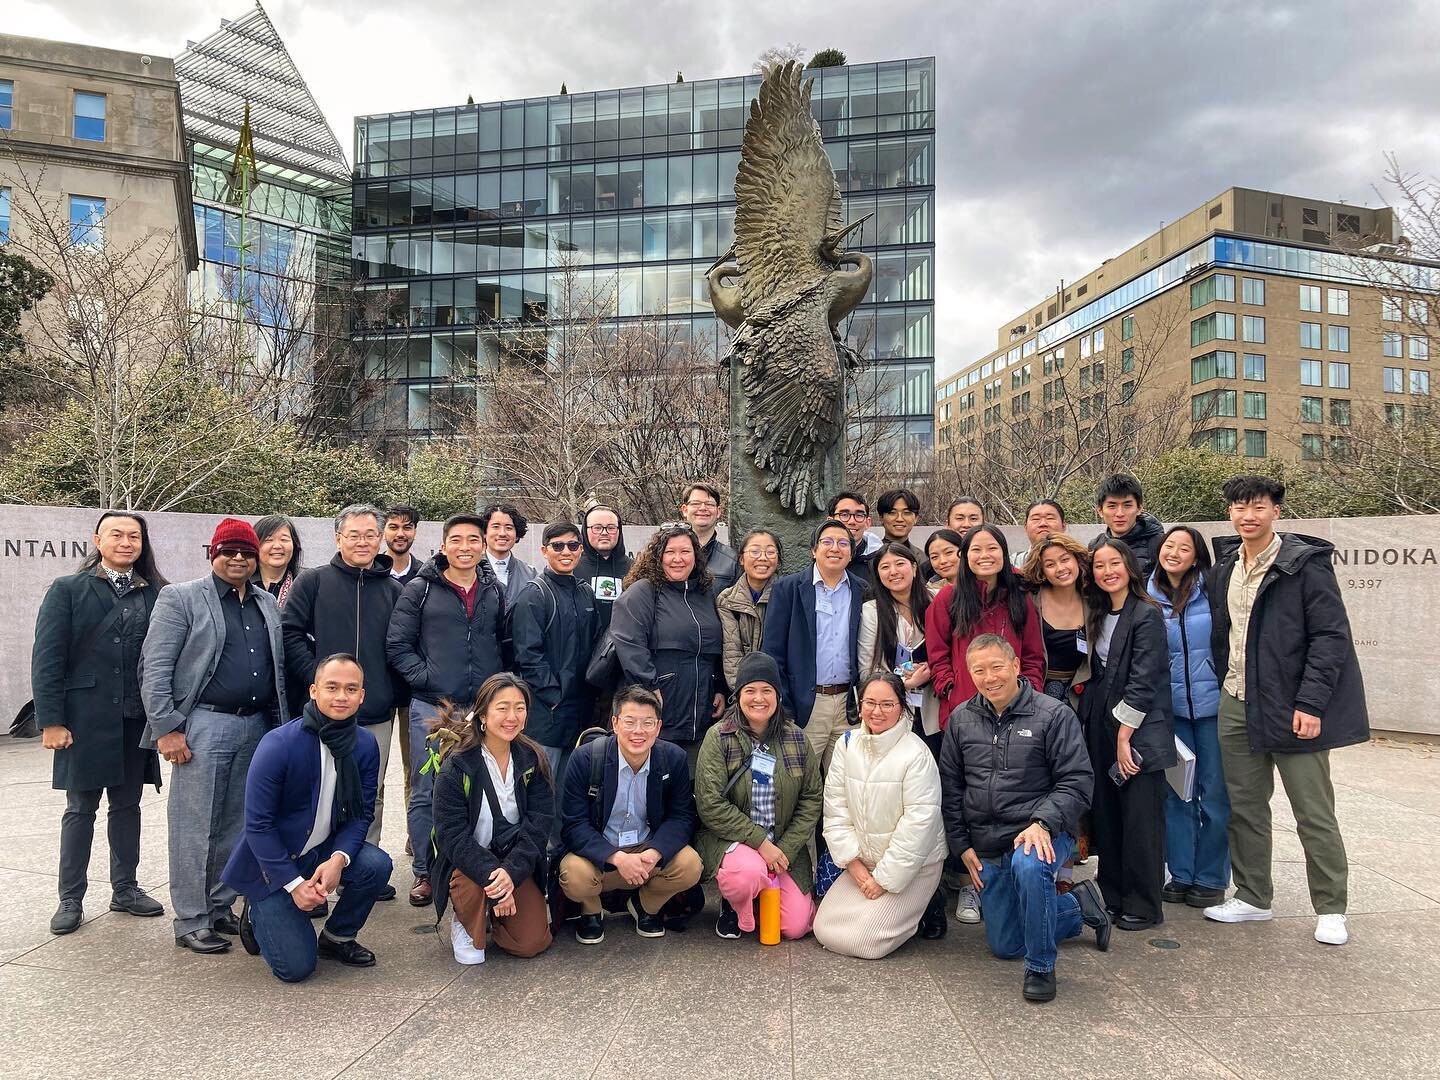 Earlier this month, participants of the JACL/OCA Leadership Summit toured the memorial. Established by @jacl_national in 1984, the four-day annual leadership summit program introduces community leaders from across the nation to the national policy-ma